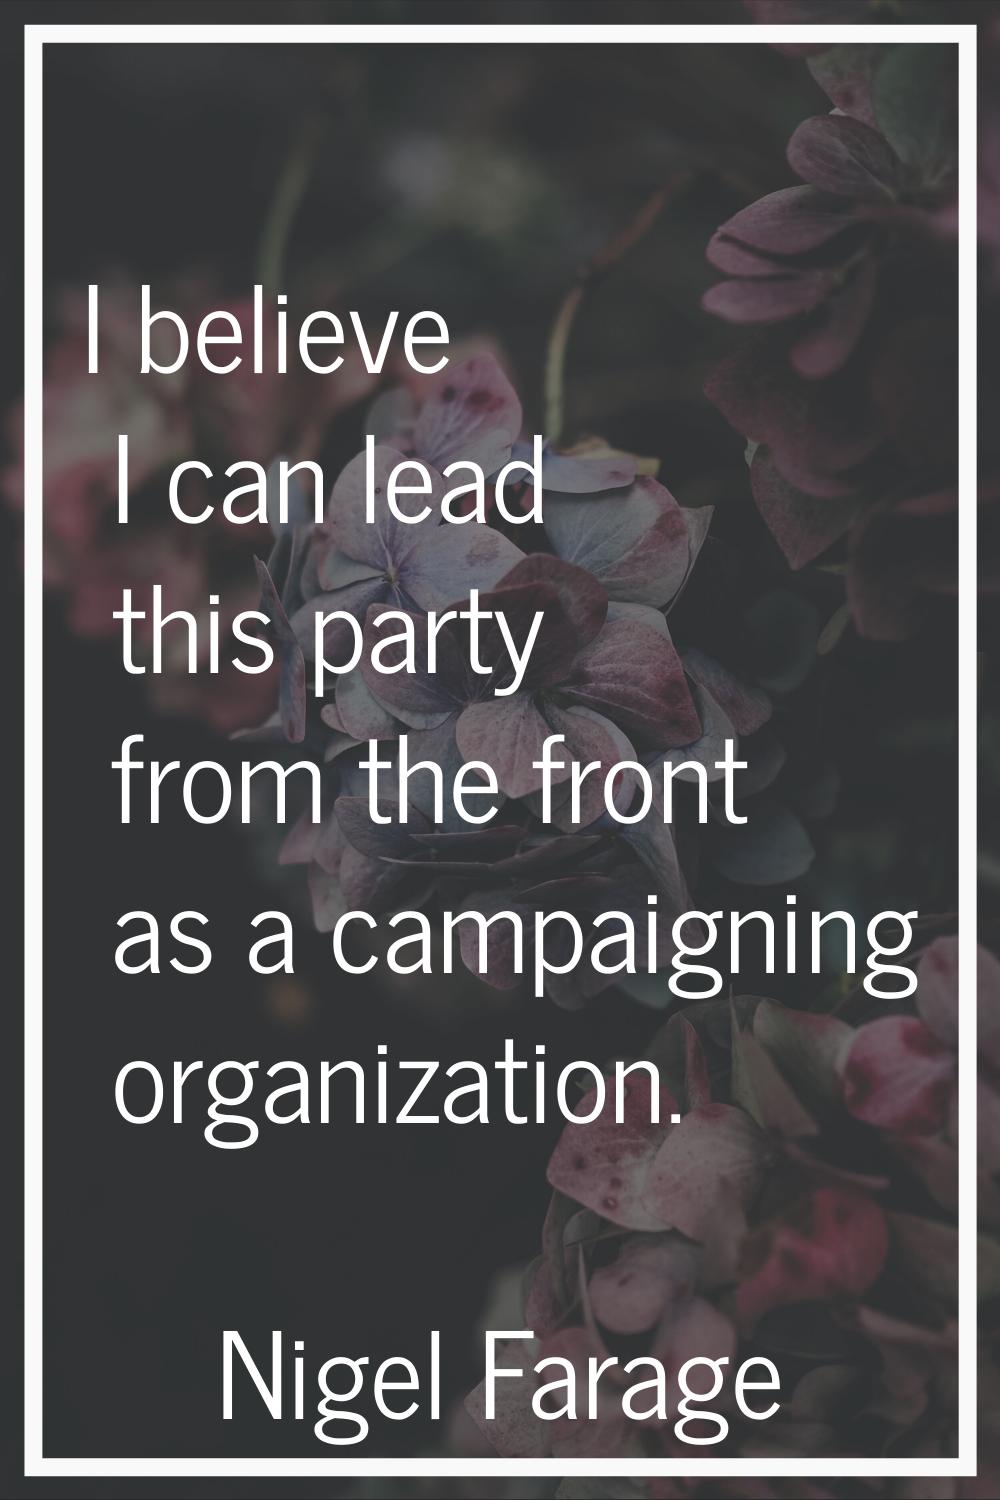 I believe I can lead this party from the front as a campaigning organization.